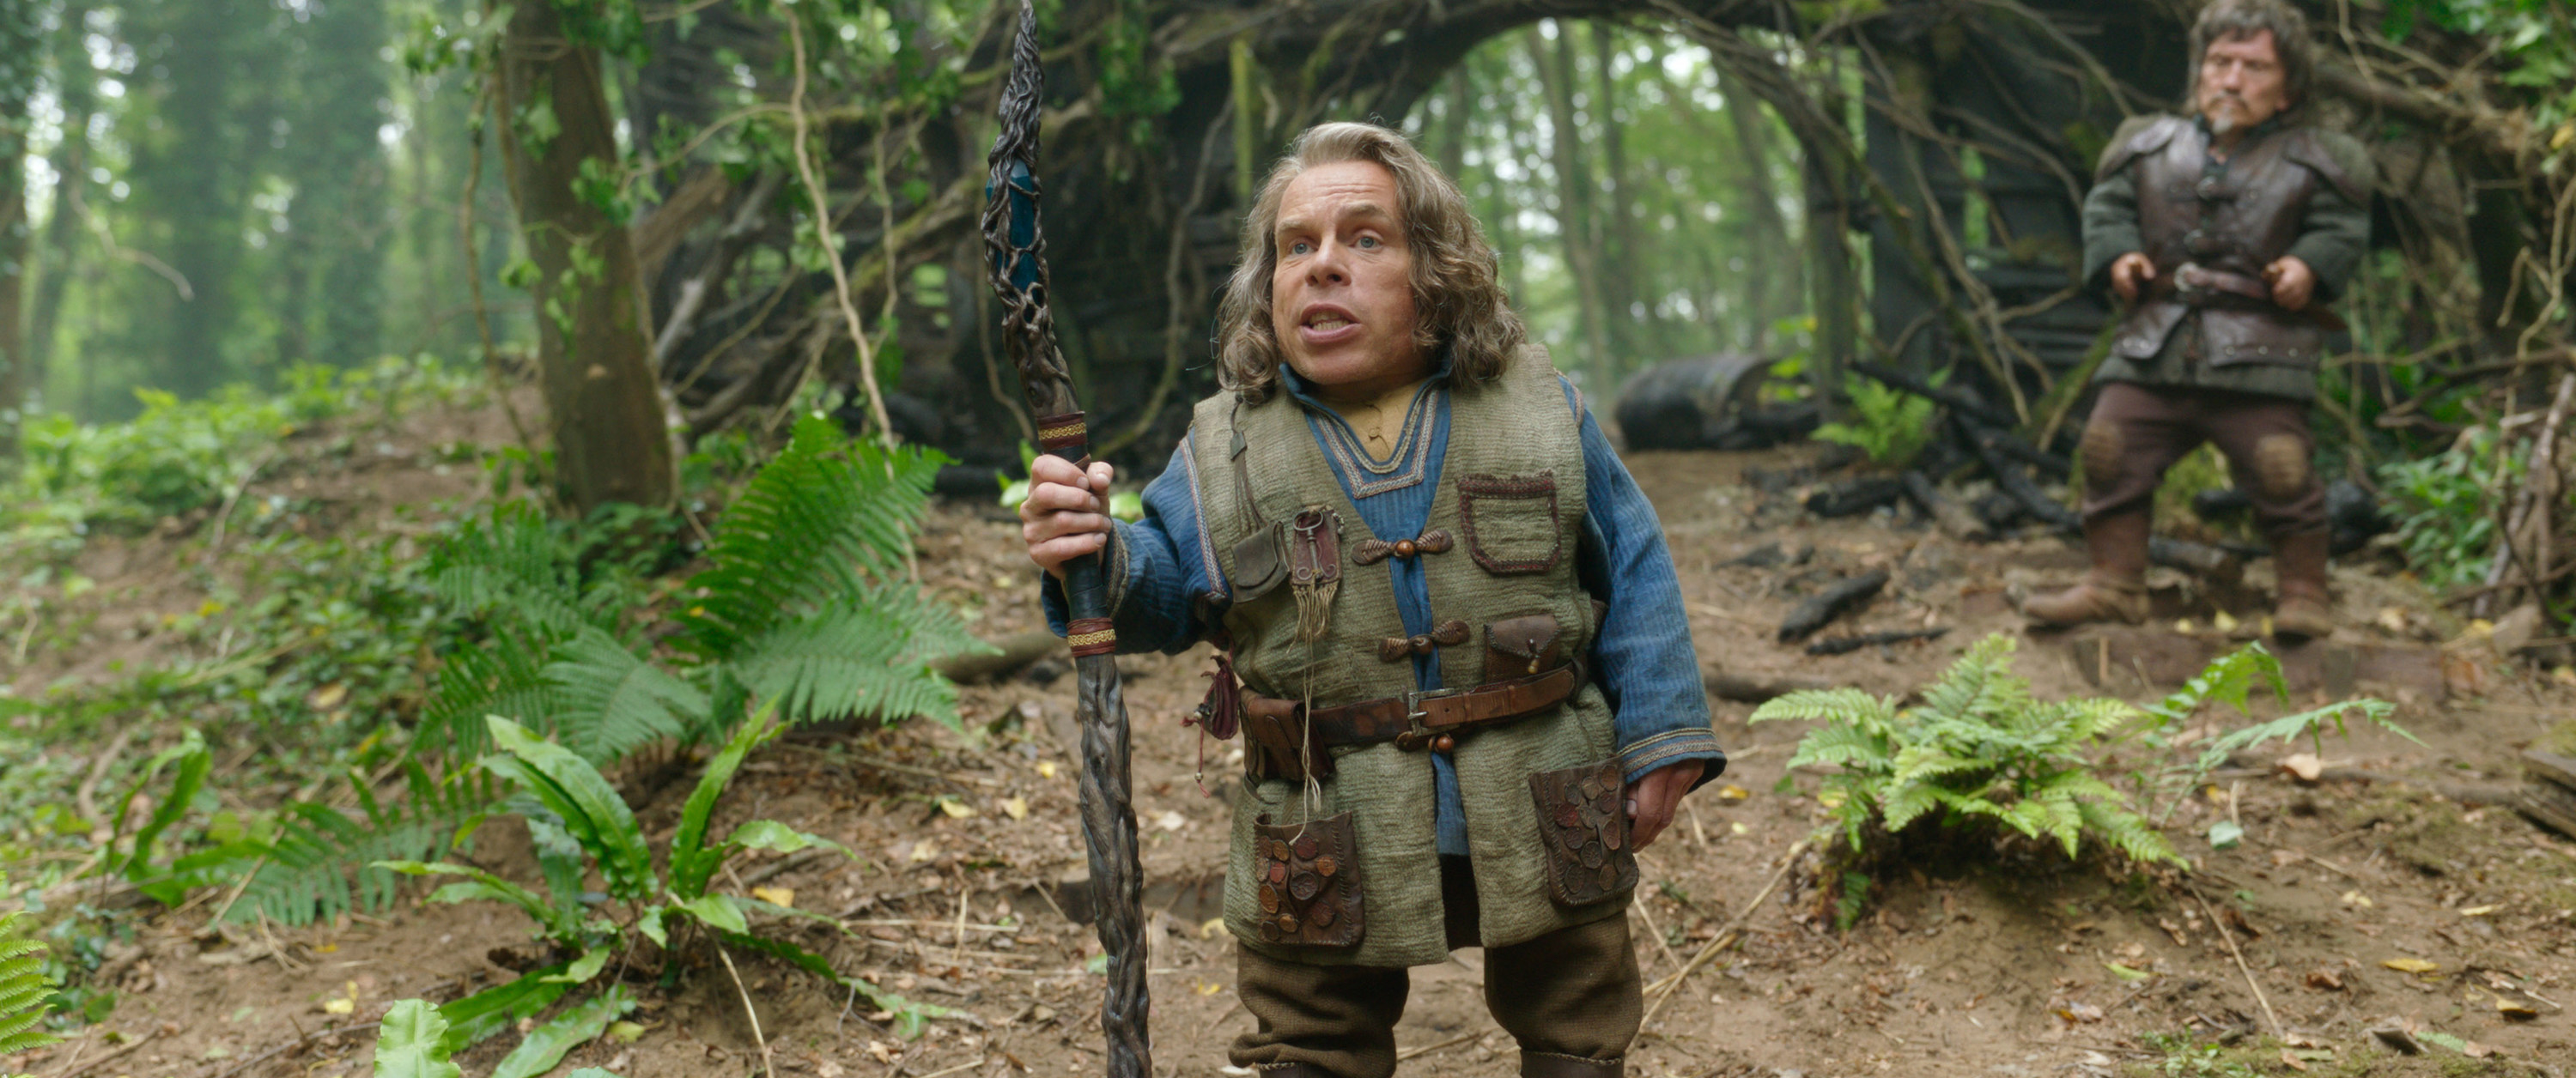 Warwick Davis stands in the woods with a walking stick